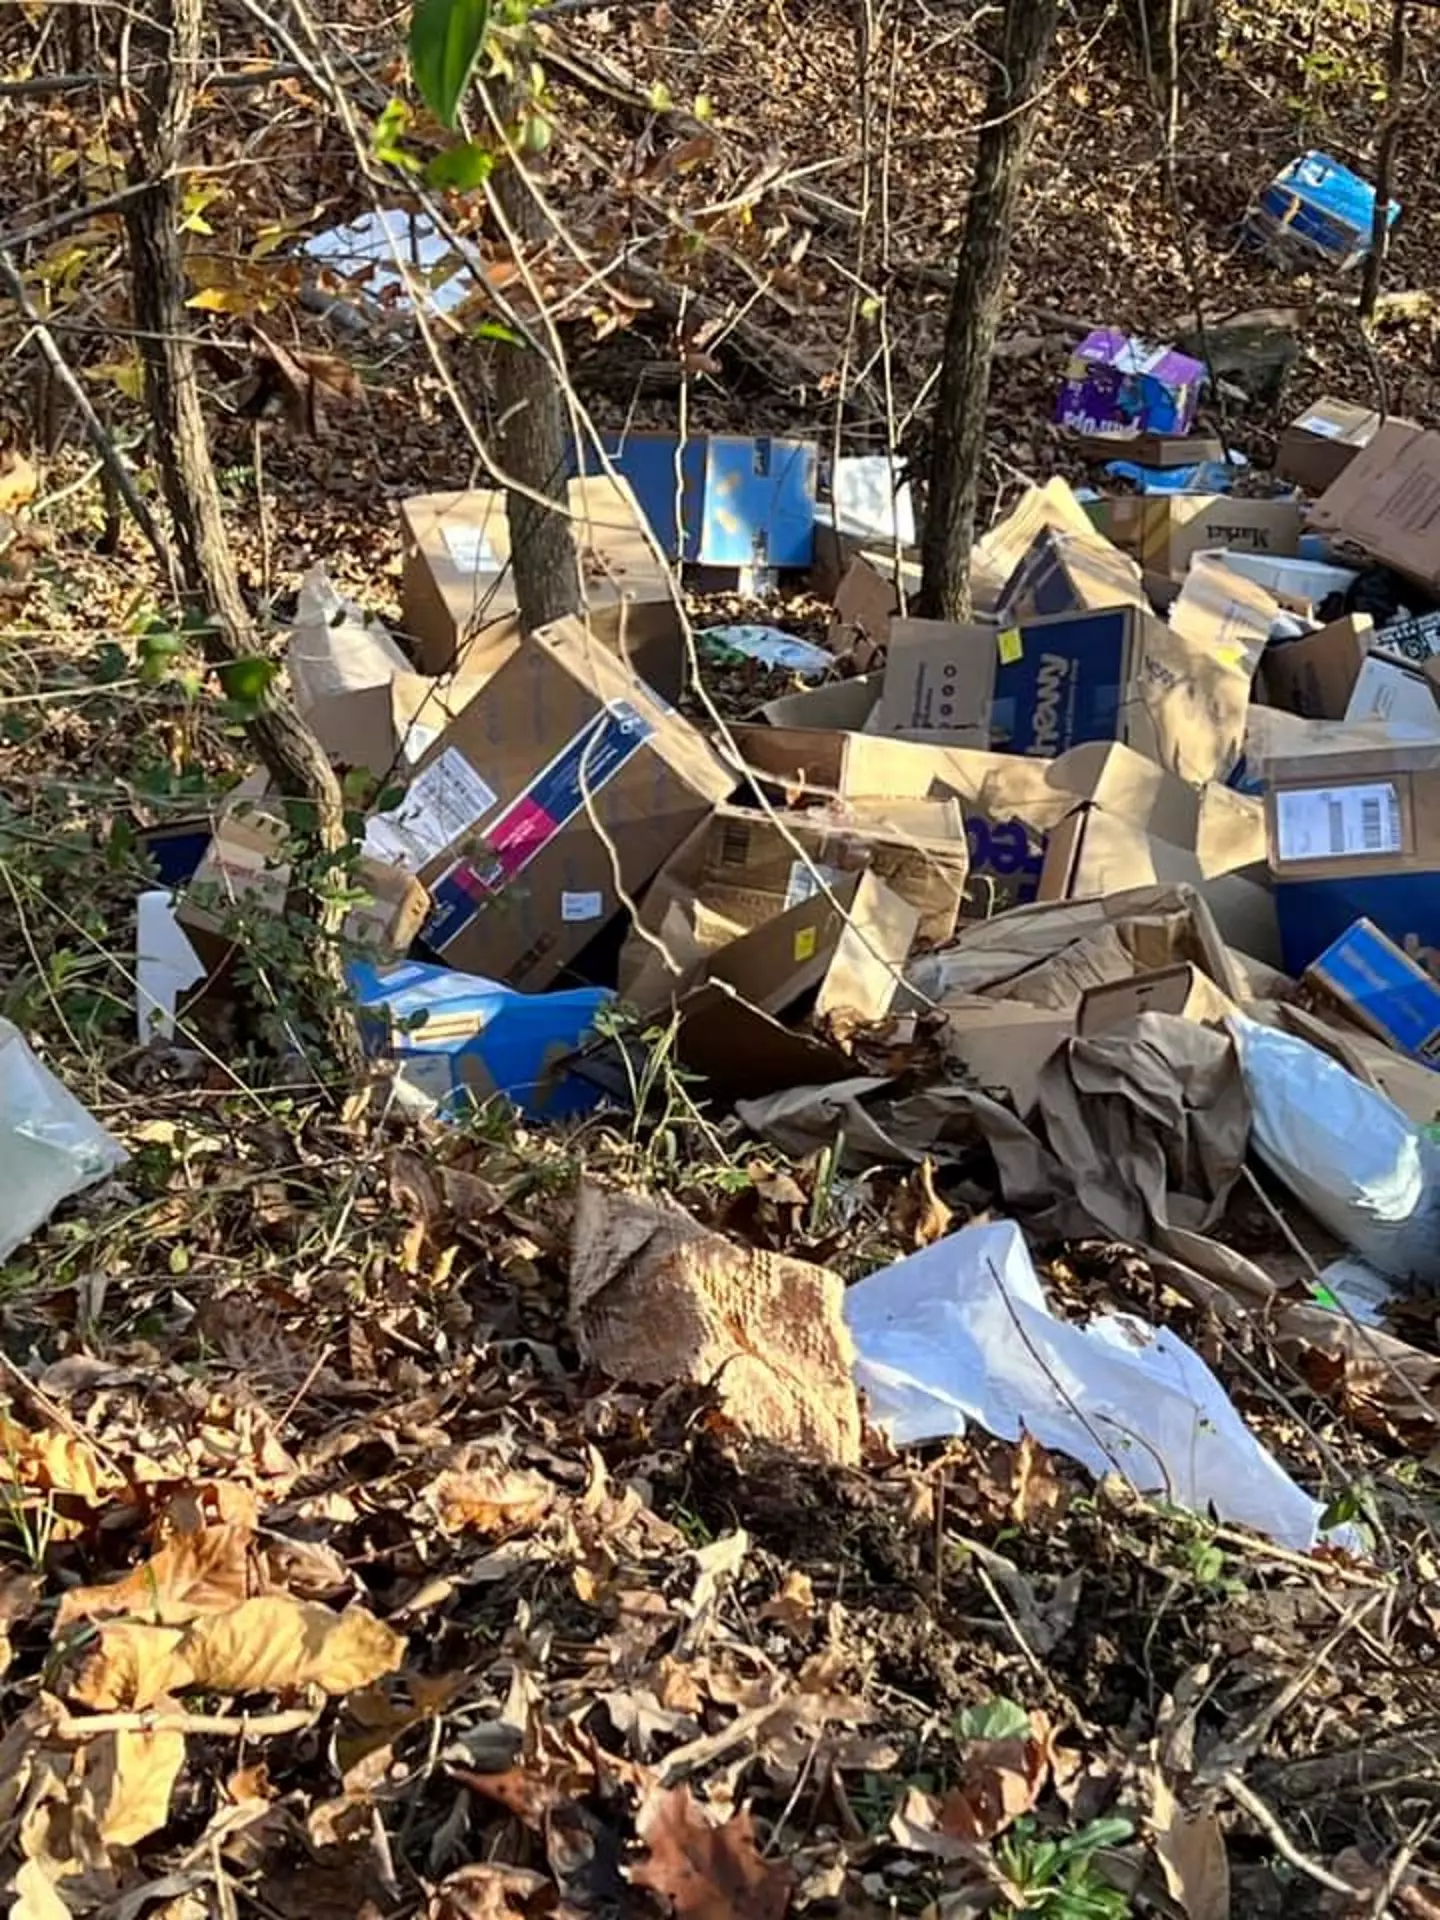 Hundreds of packages were discovered in the ravine.